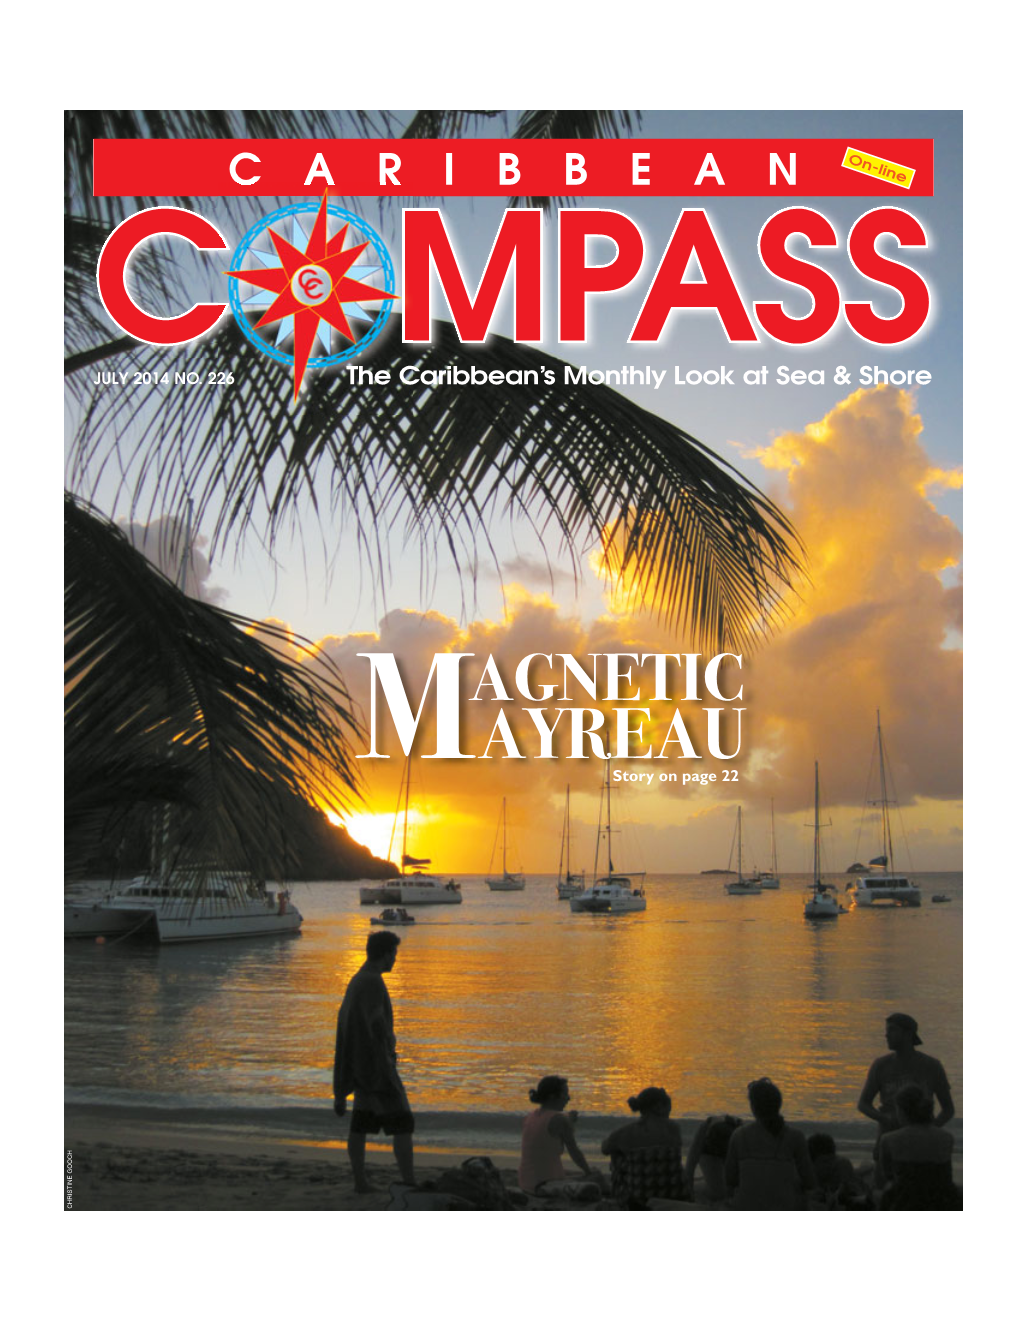 AYREAU M Story on Page 22 CHRISTINE GOOCH JULY 2014 CARIBBEAN COMPASS PAGE 2 DEPARTMENTS Info & Updates